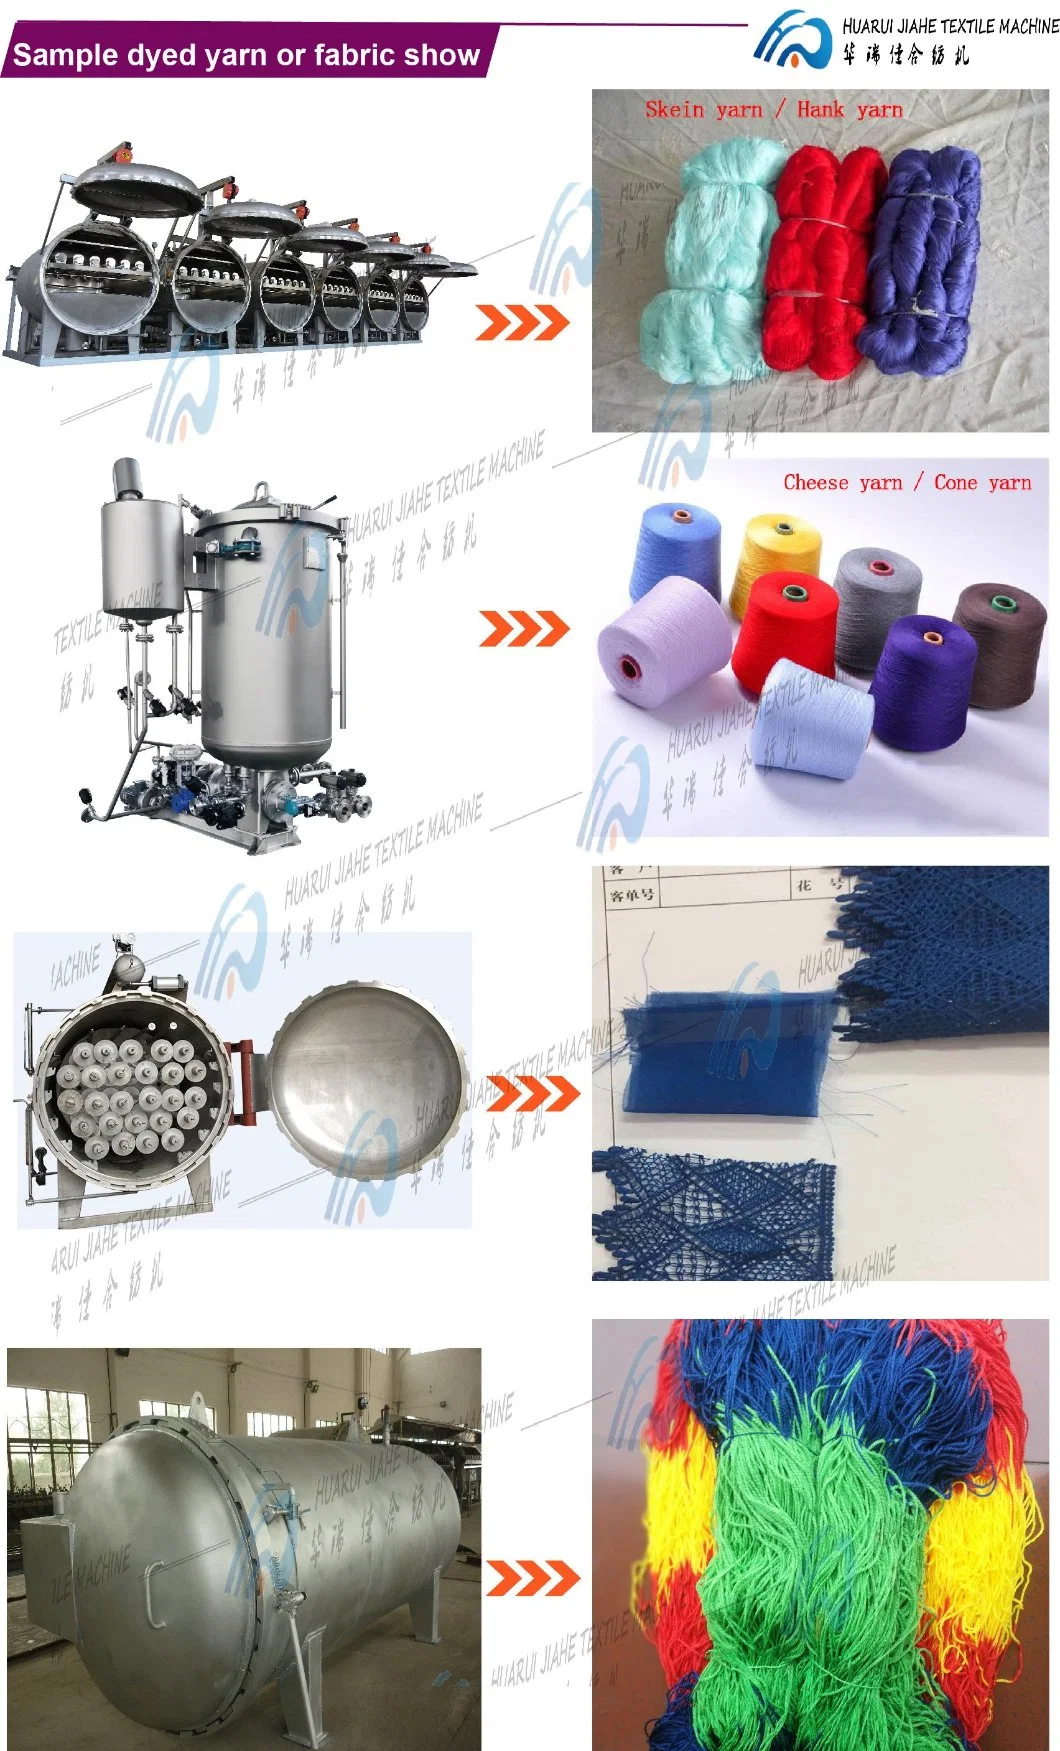 Beam Dye Machine Is for Desizing, Bleaching, Washing The Open-Width Textile Cloth as Well as Dyeing Open-Width Textile(Cotton&lt;50%=, Polyester, Blended Textile,